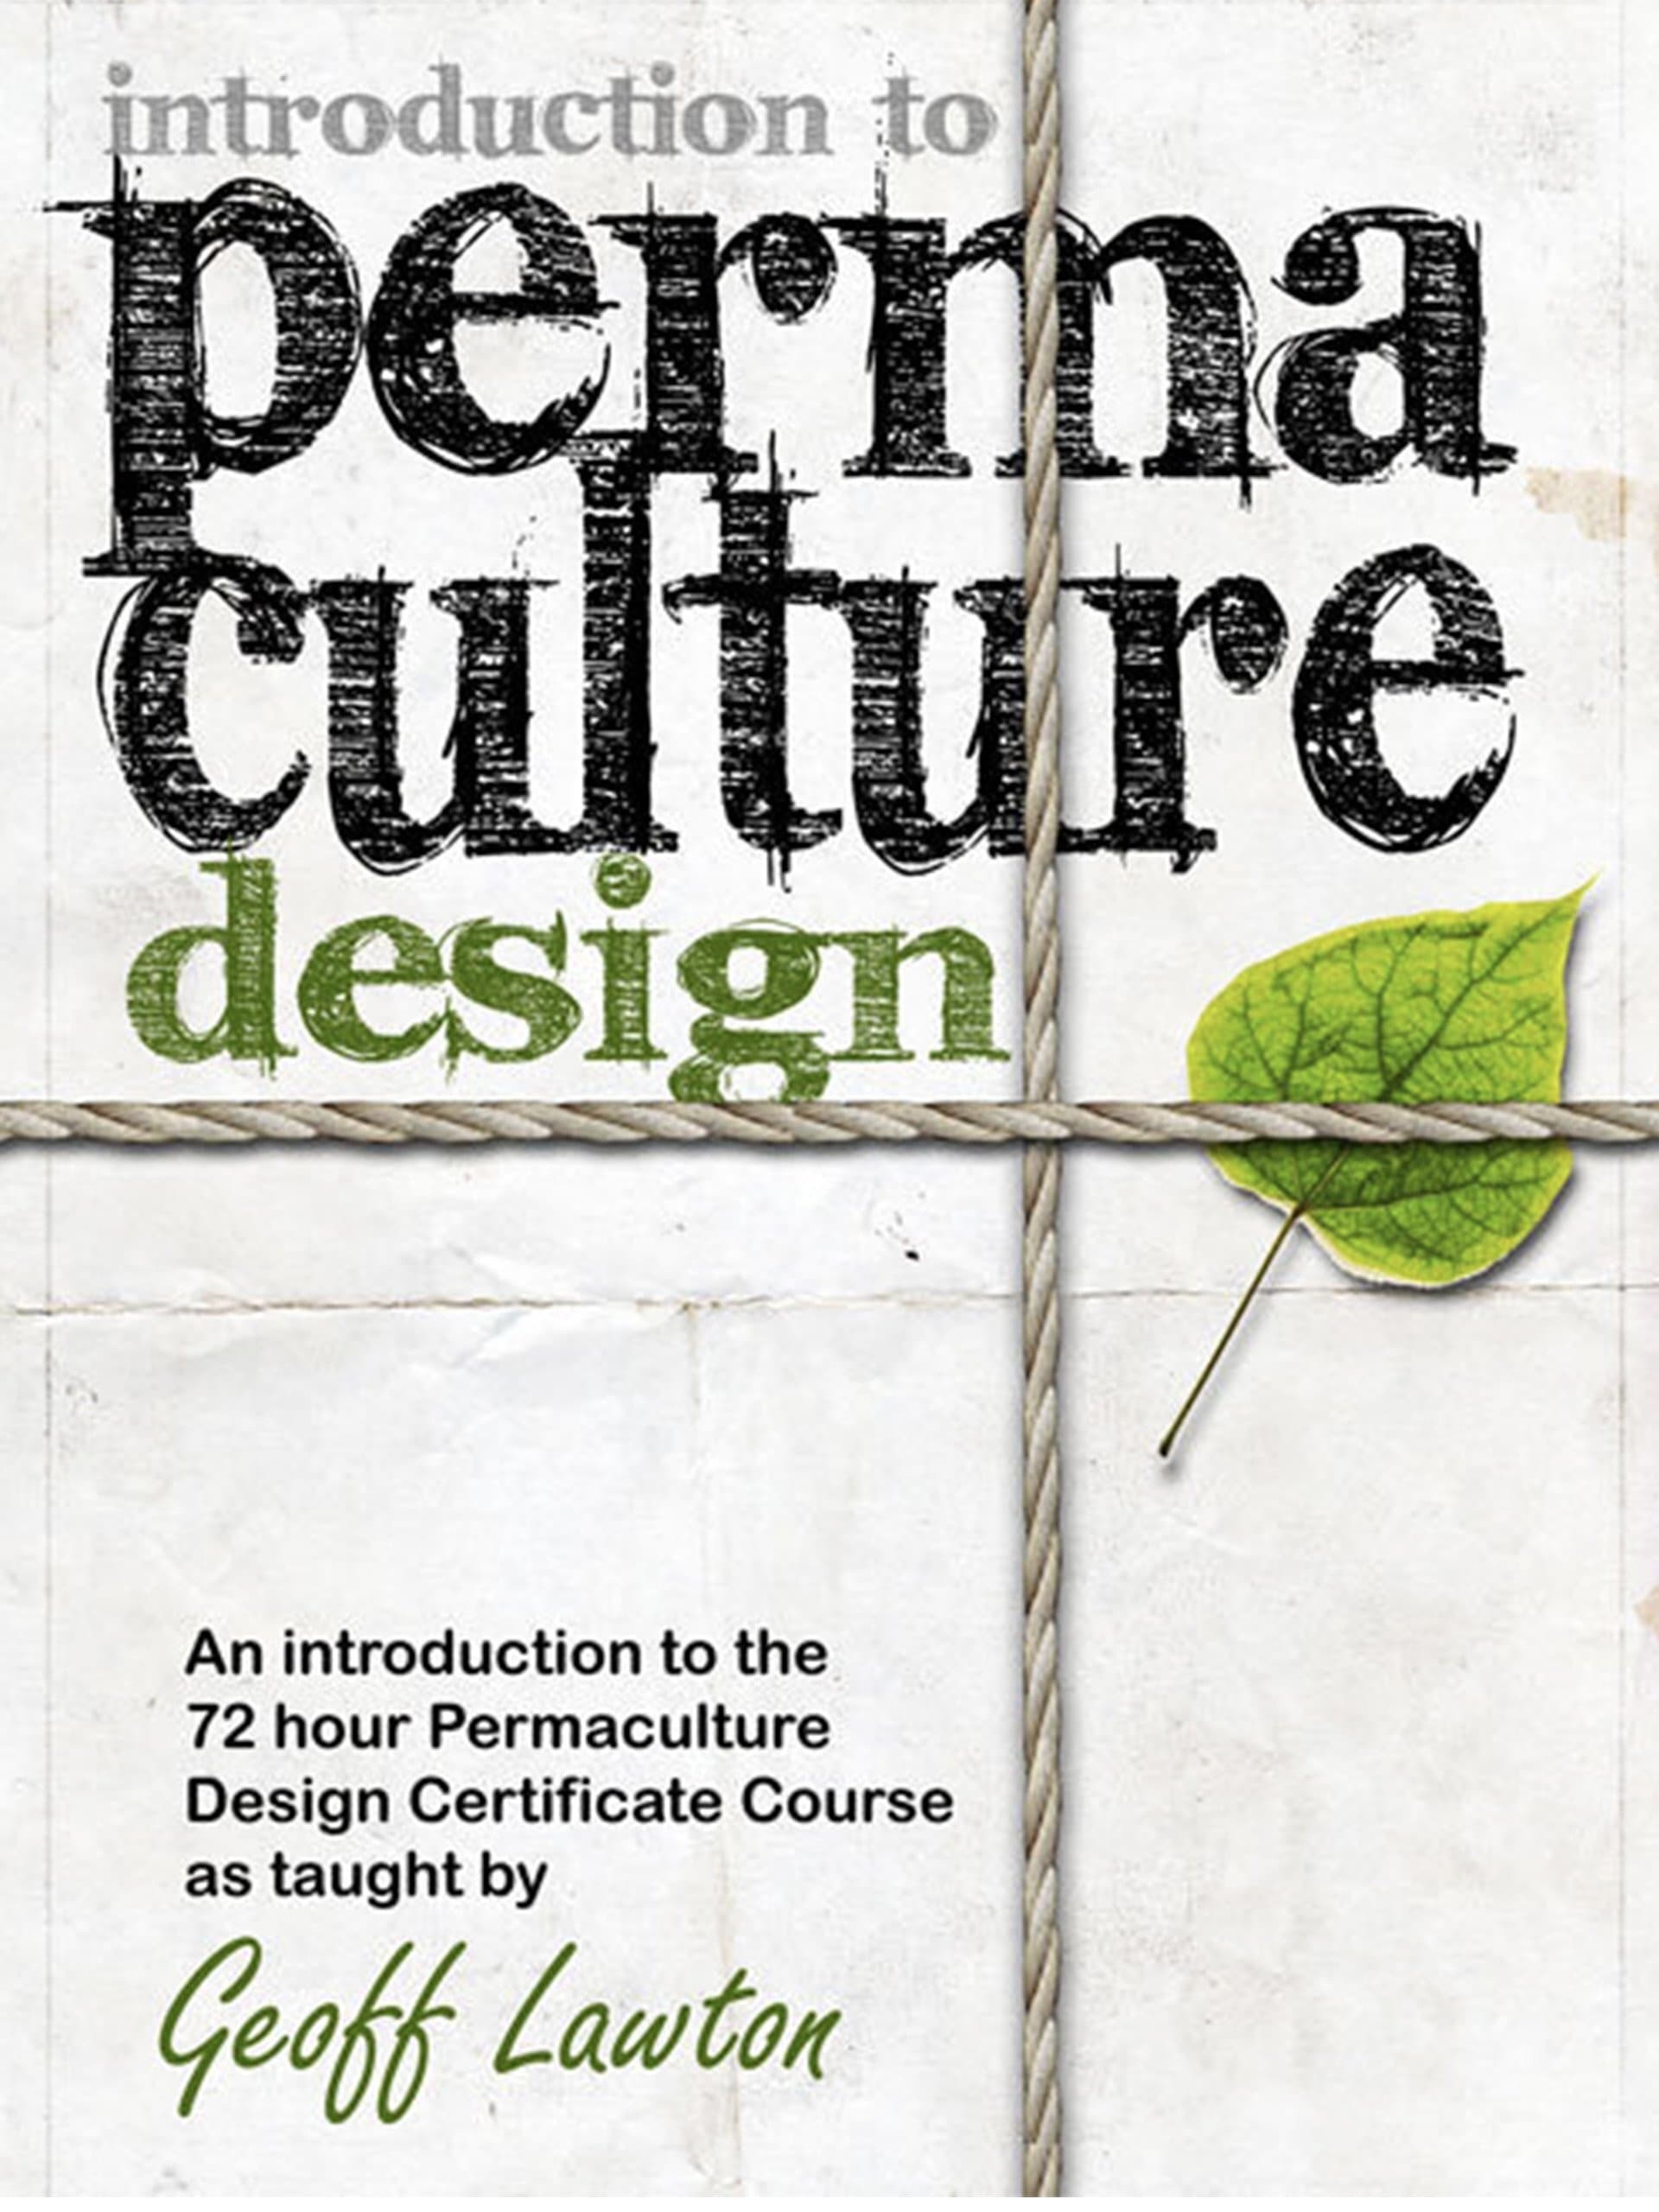 Introduction to Permaculture Design